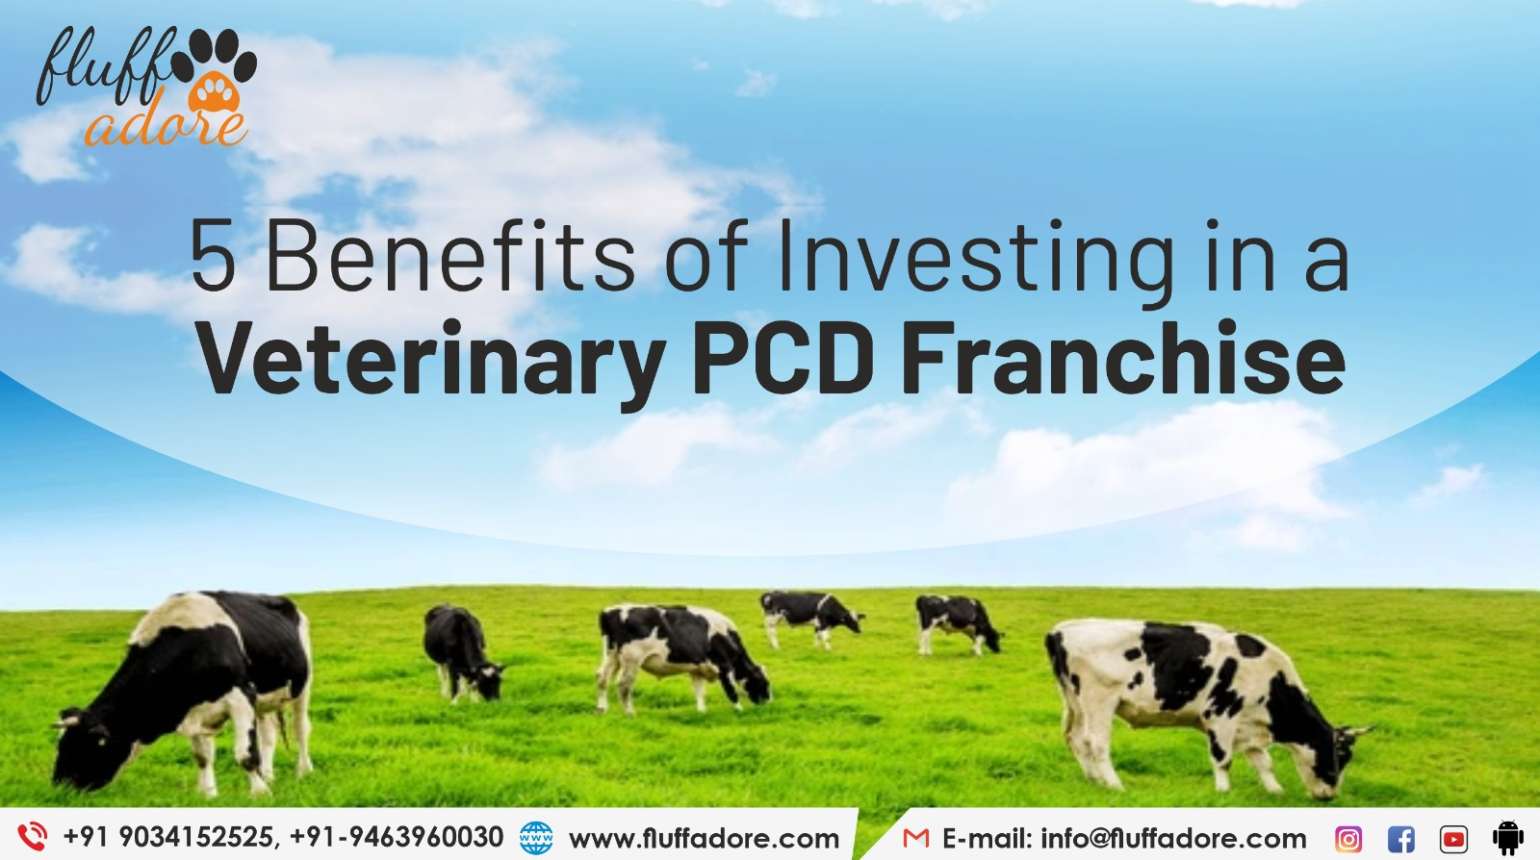 5 Benefits of Investing in a Veterinary PCD Franchise